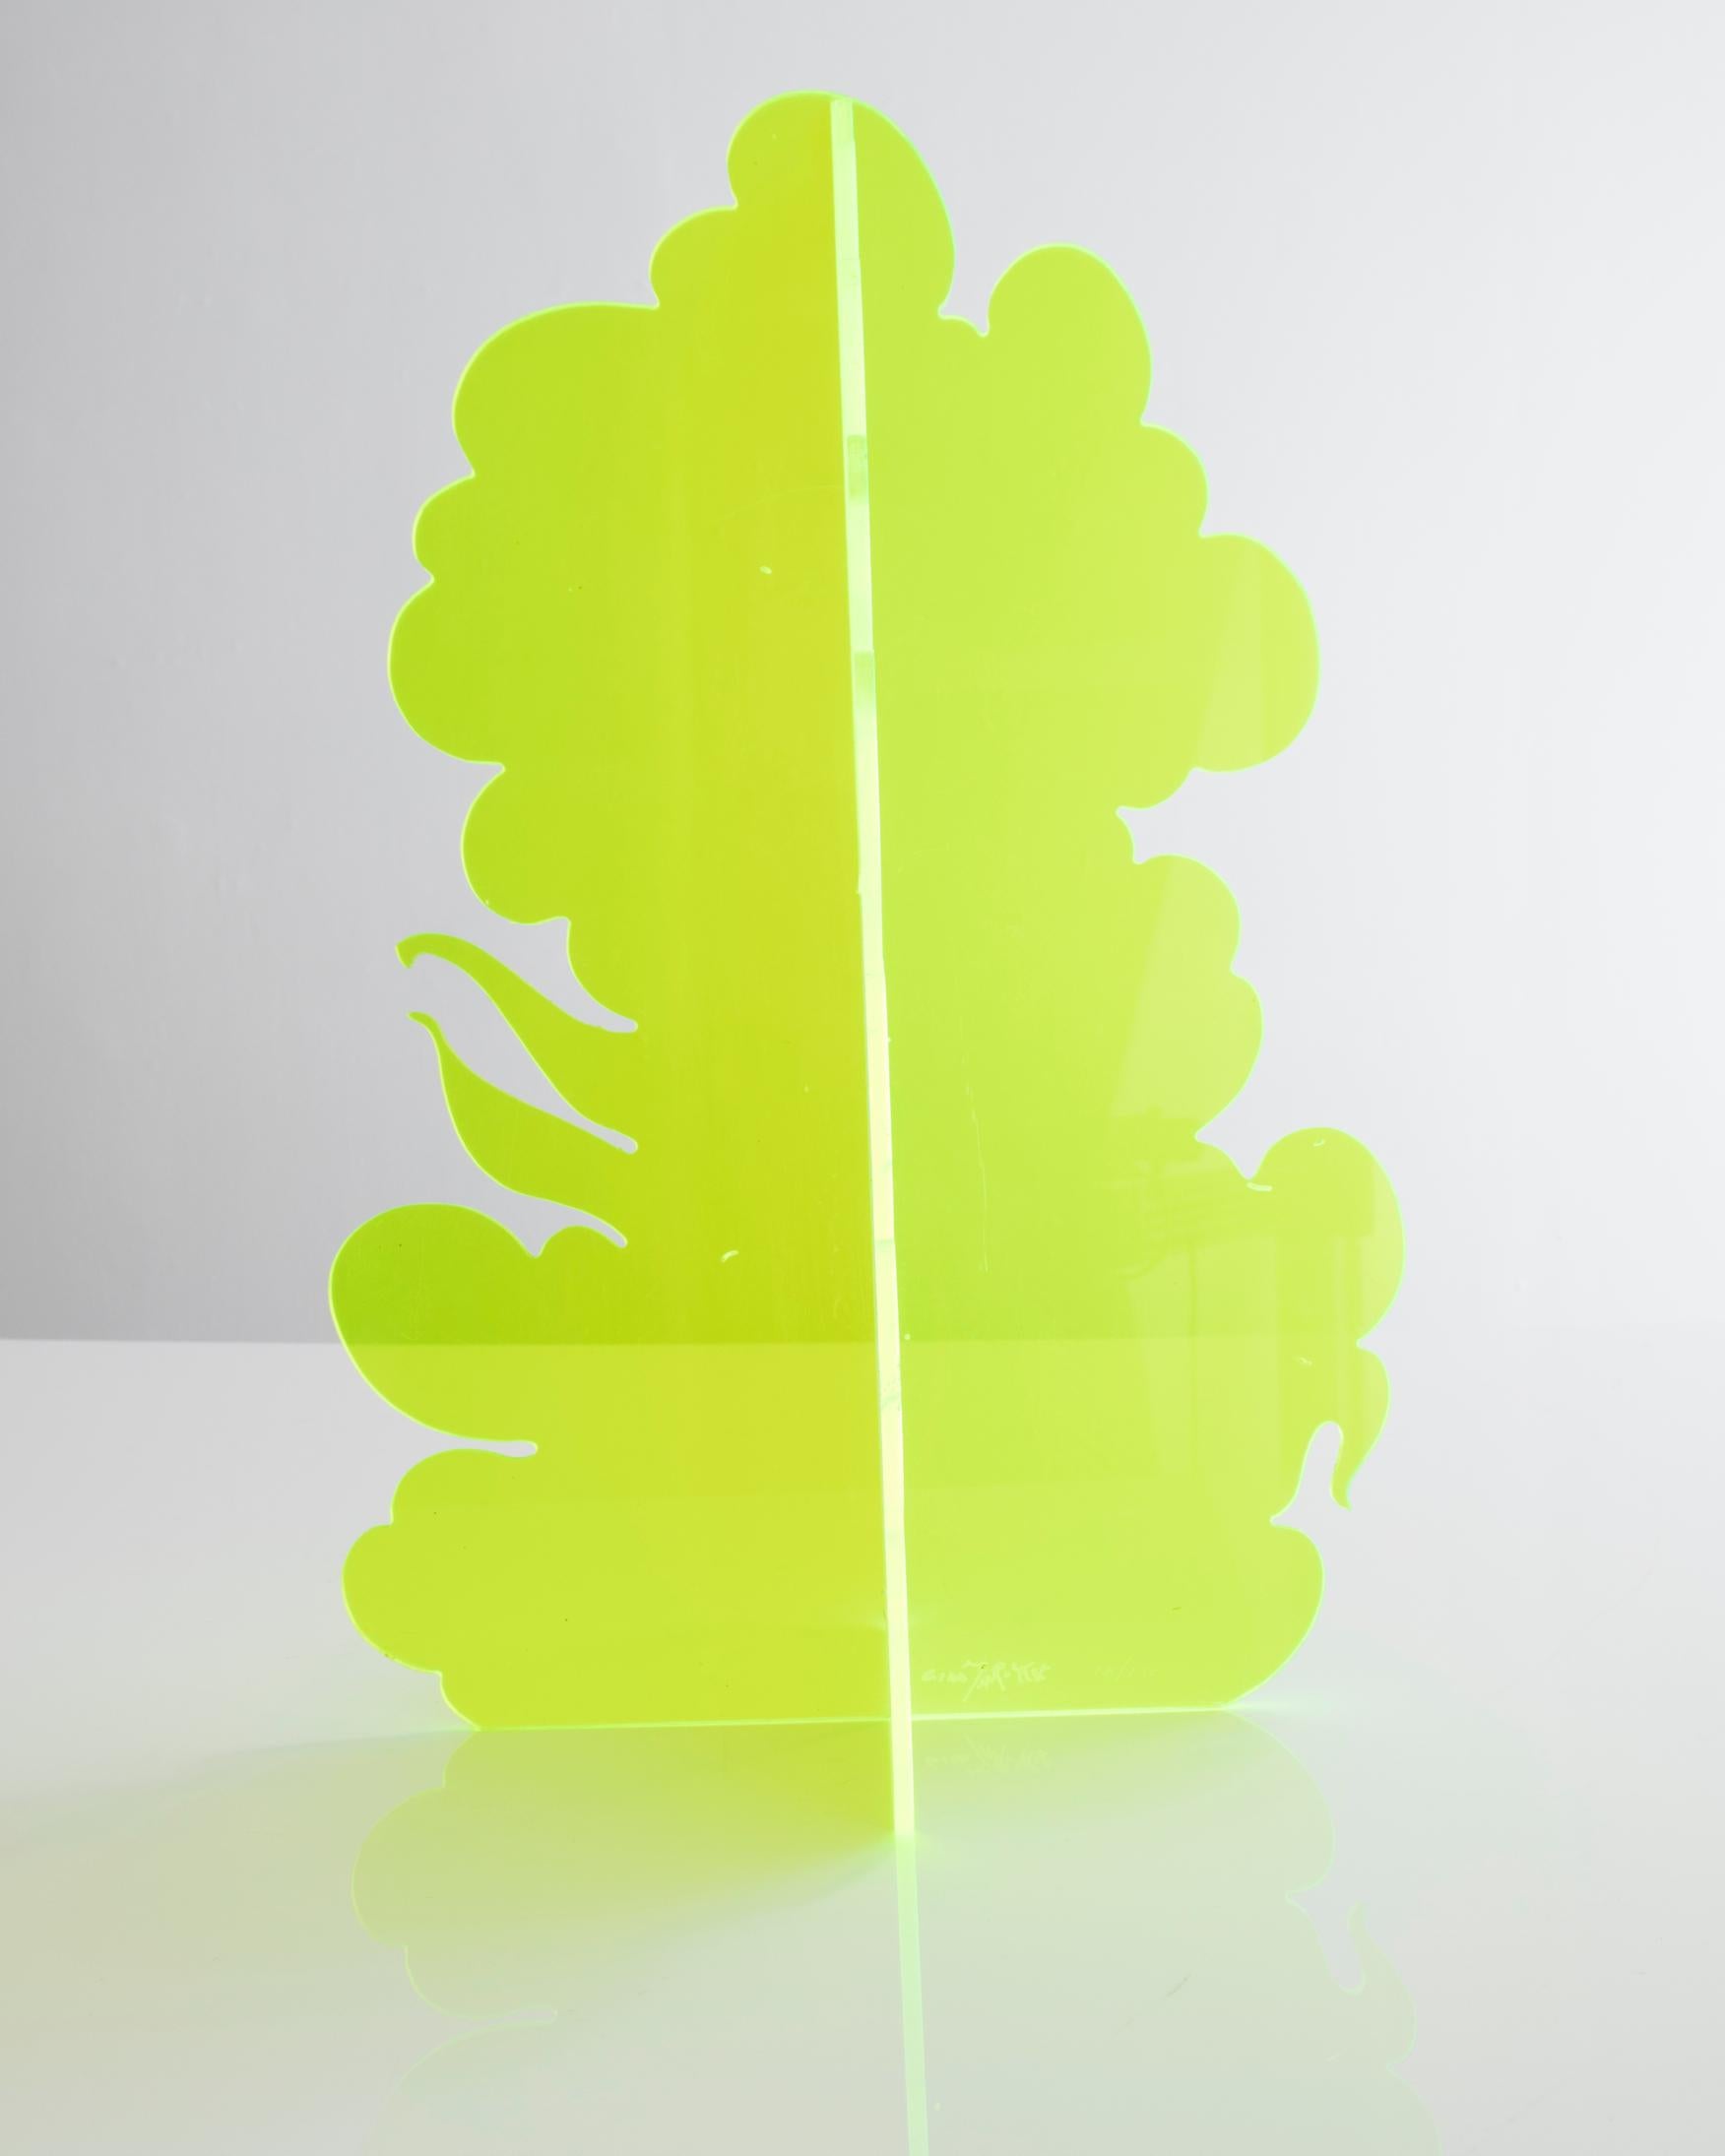 Sculpture in plexiglass. Designed by Gino Marotta, Italy, 1969. Signed and numbered 18/130.